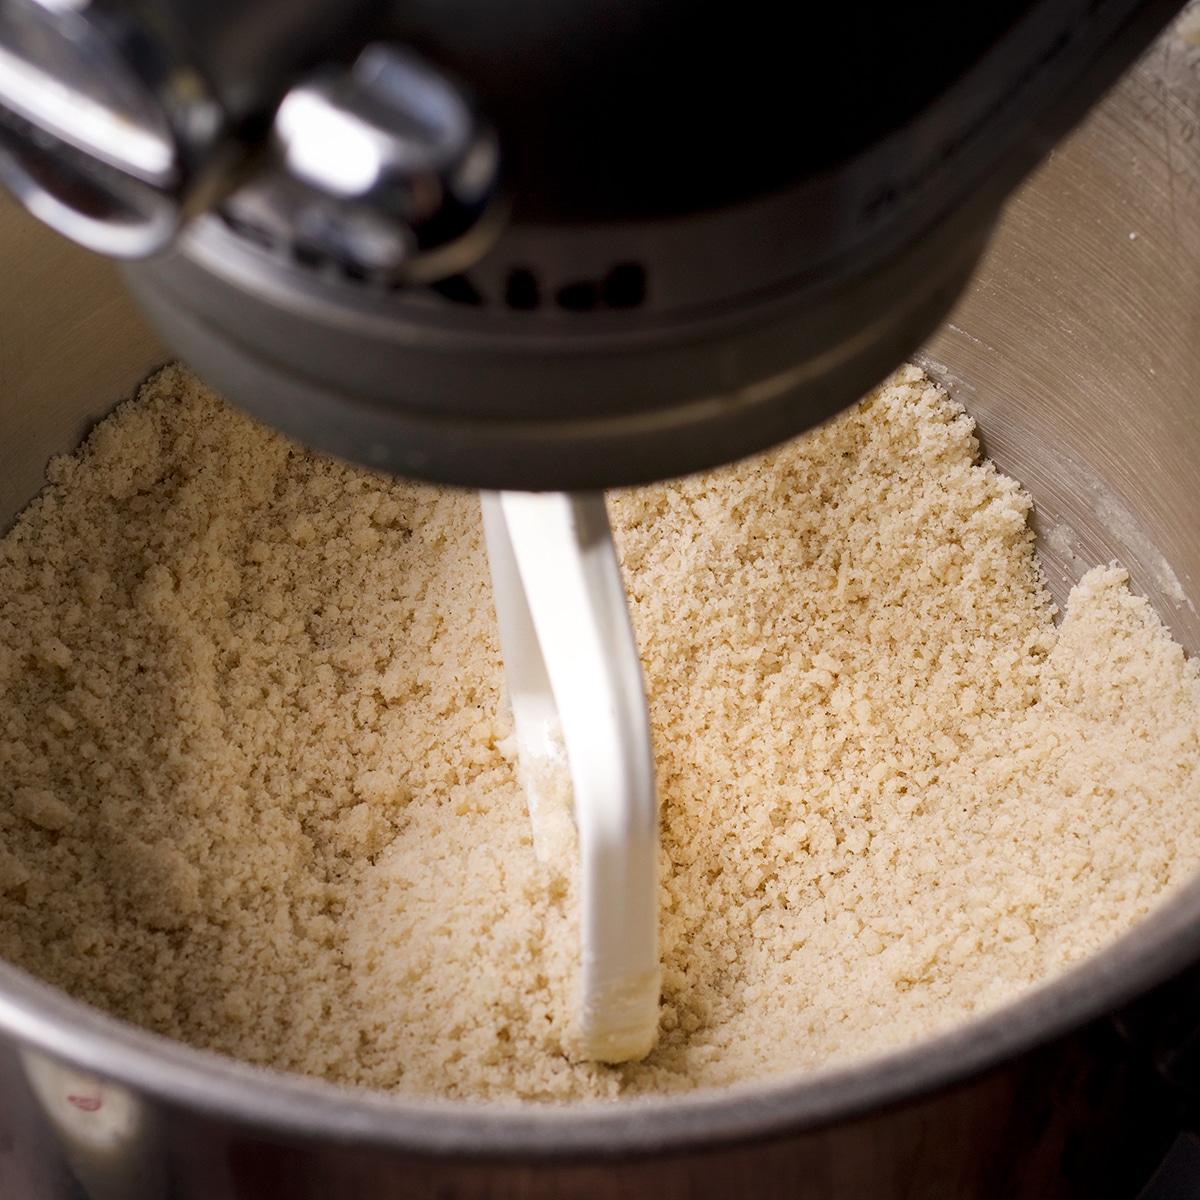 Mixing butter into flour and sugar until the texture resembles coarse crumbs.